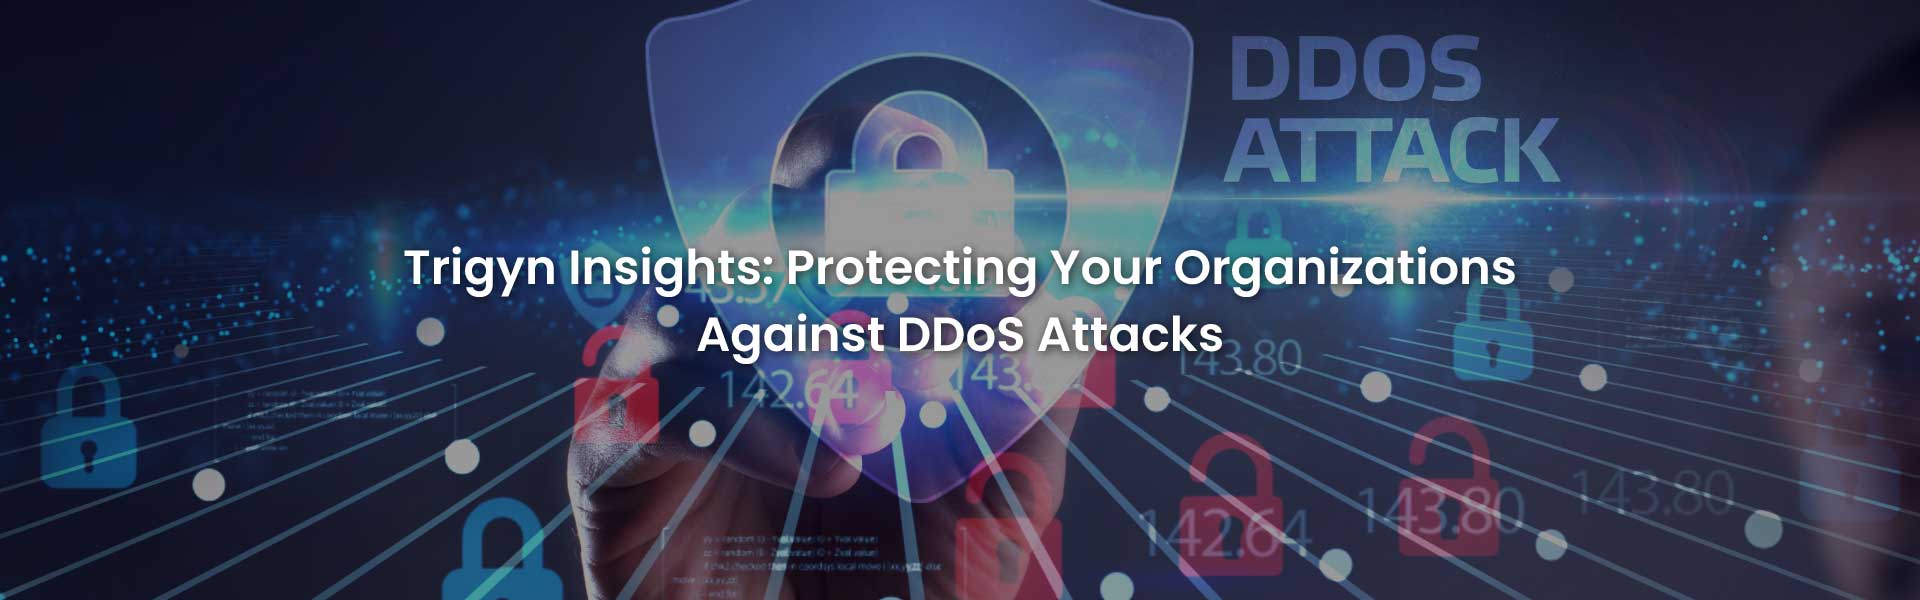 Distributed Denial of Service (DDoS) Attacks